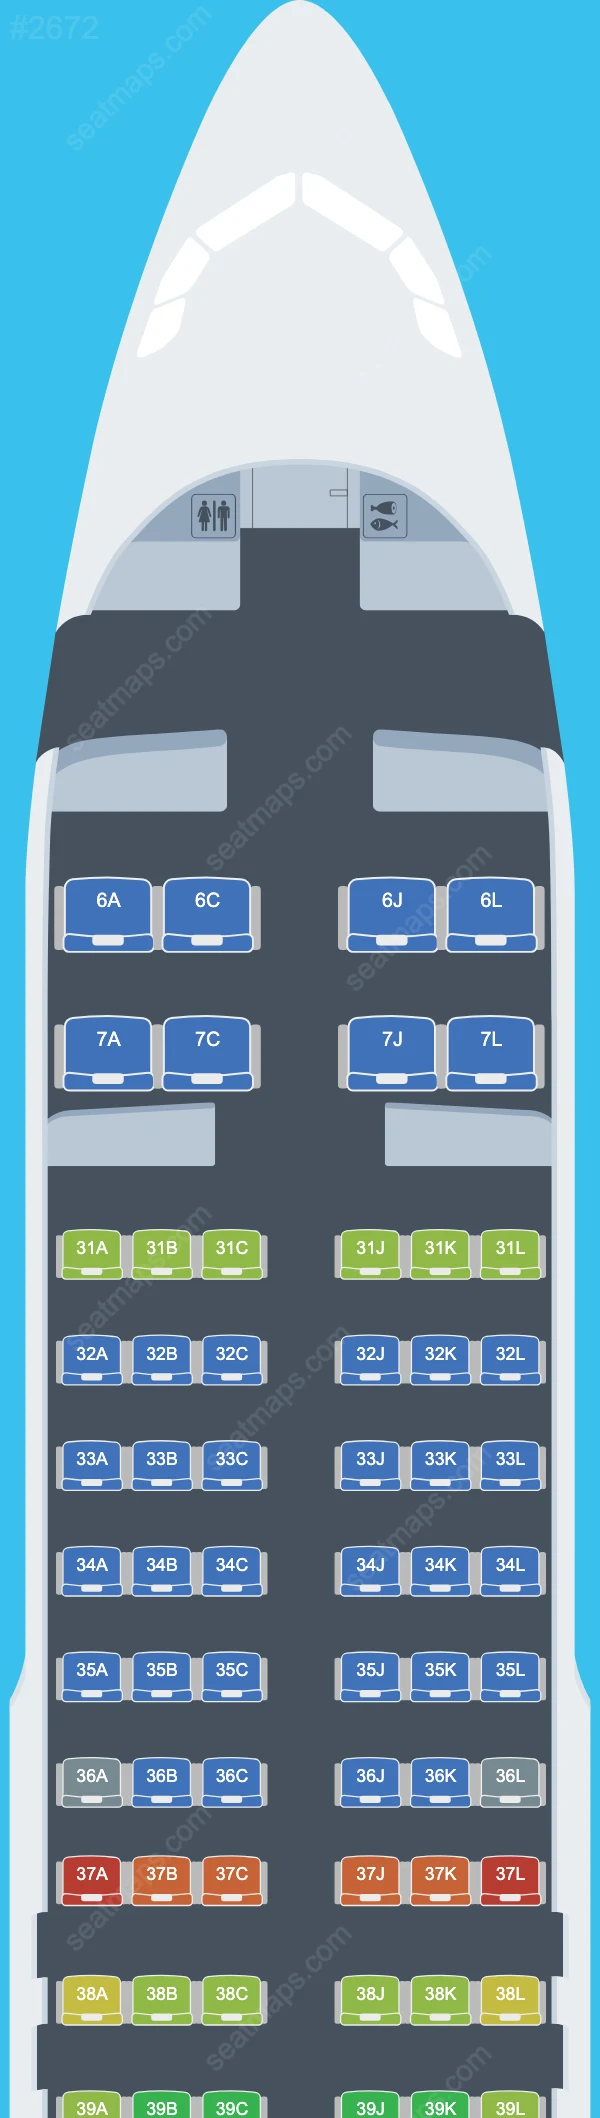 China Eastern Airbus A320 Seat Maps A320-200